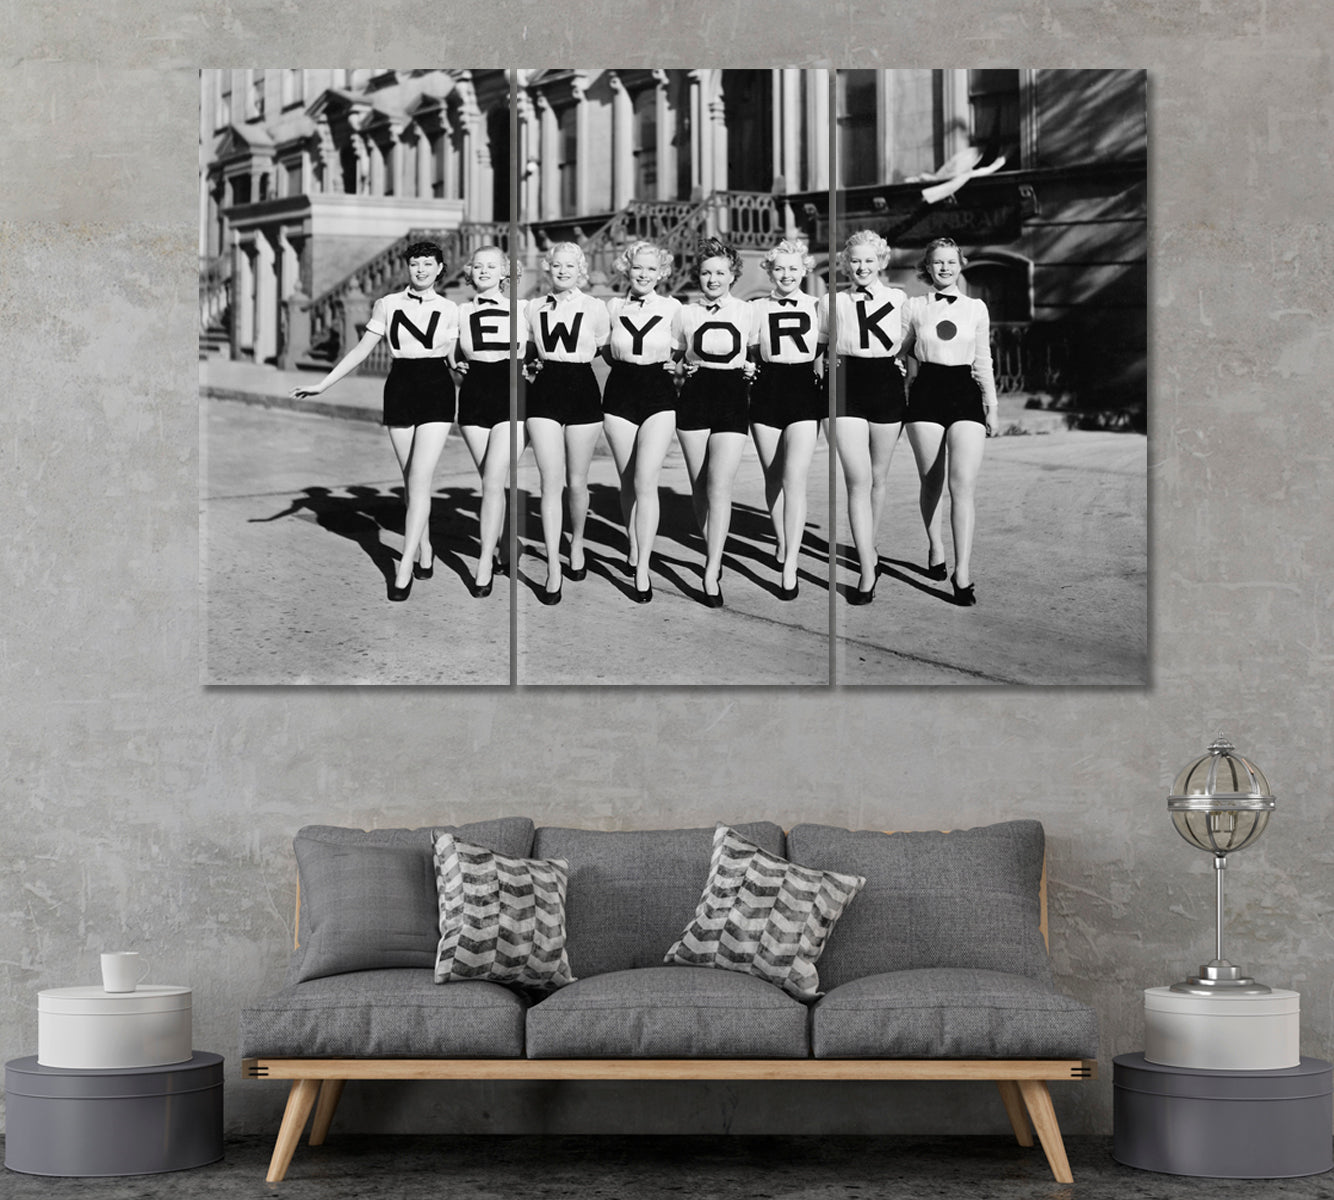 Retro Snapshot Chorus Line with New York on T-Shirts Canvas Print ArtLexy 3 Panels 36"x24" inches 